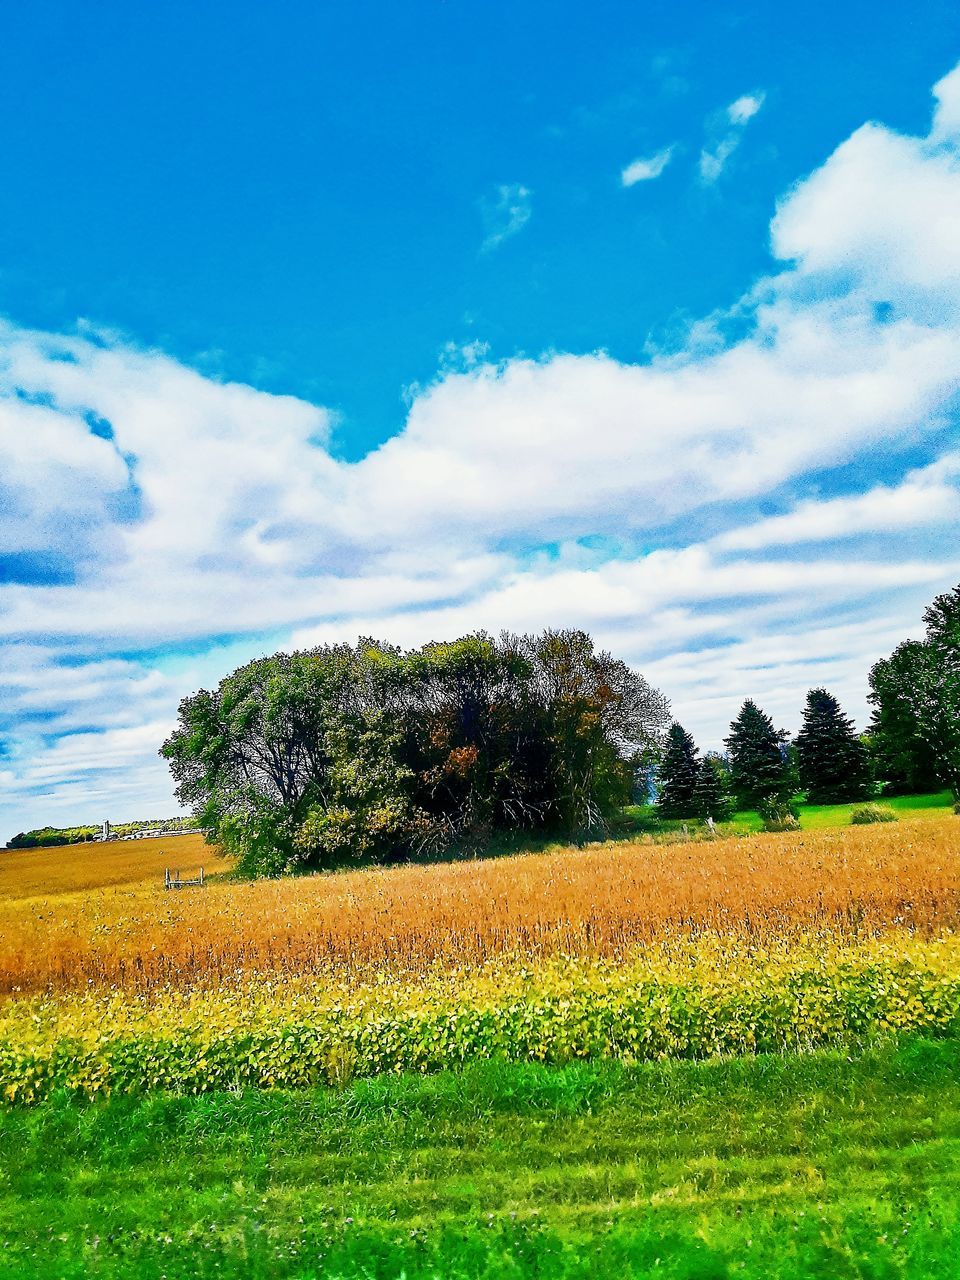 plant, landscape, sky, cloud - sky, field, environment, land, tranquil scene, beauty in nature, tranquility, scenics - nature, rural scene, agriculture, growth, nature, yellow, farm, tree, no people, day, outdoors, plantation